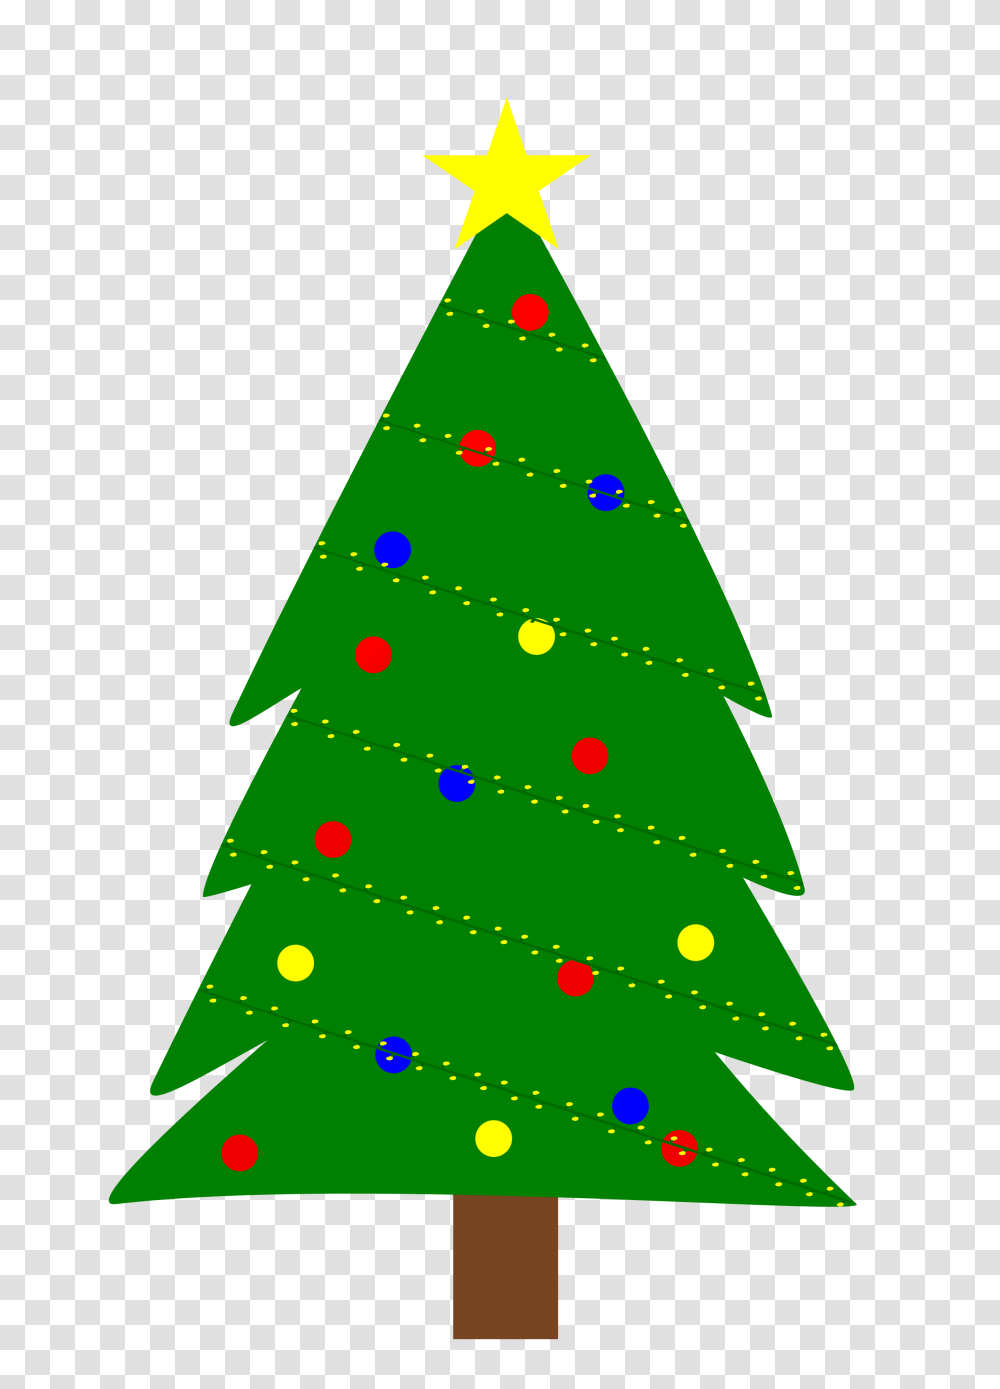 Decorated Christmas Tree With Star Svg Vector Purple Christmas Tree Drawing, Ornament, Plant, Lighting, Triangle Transparent Png